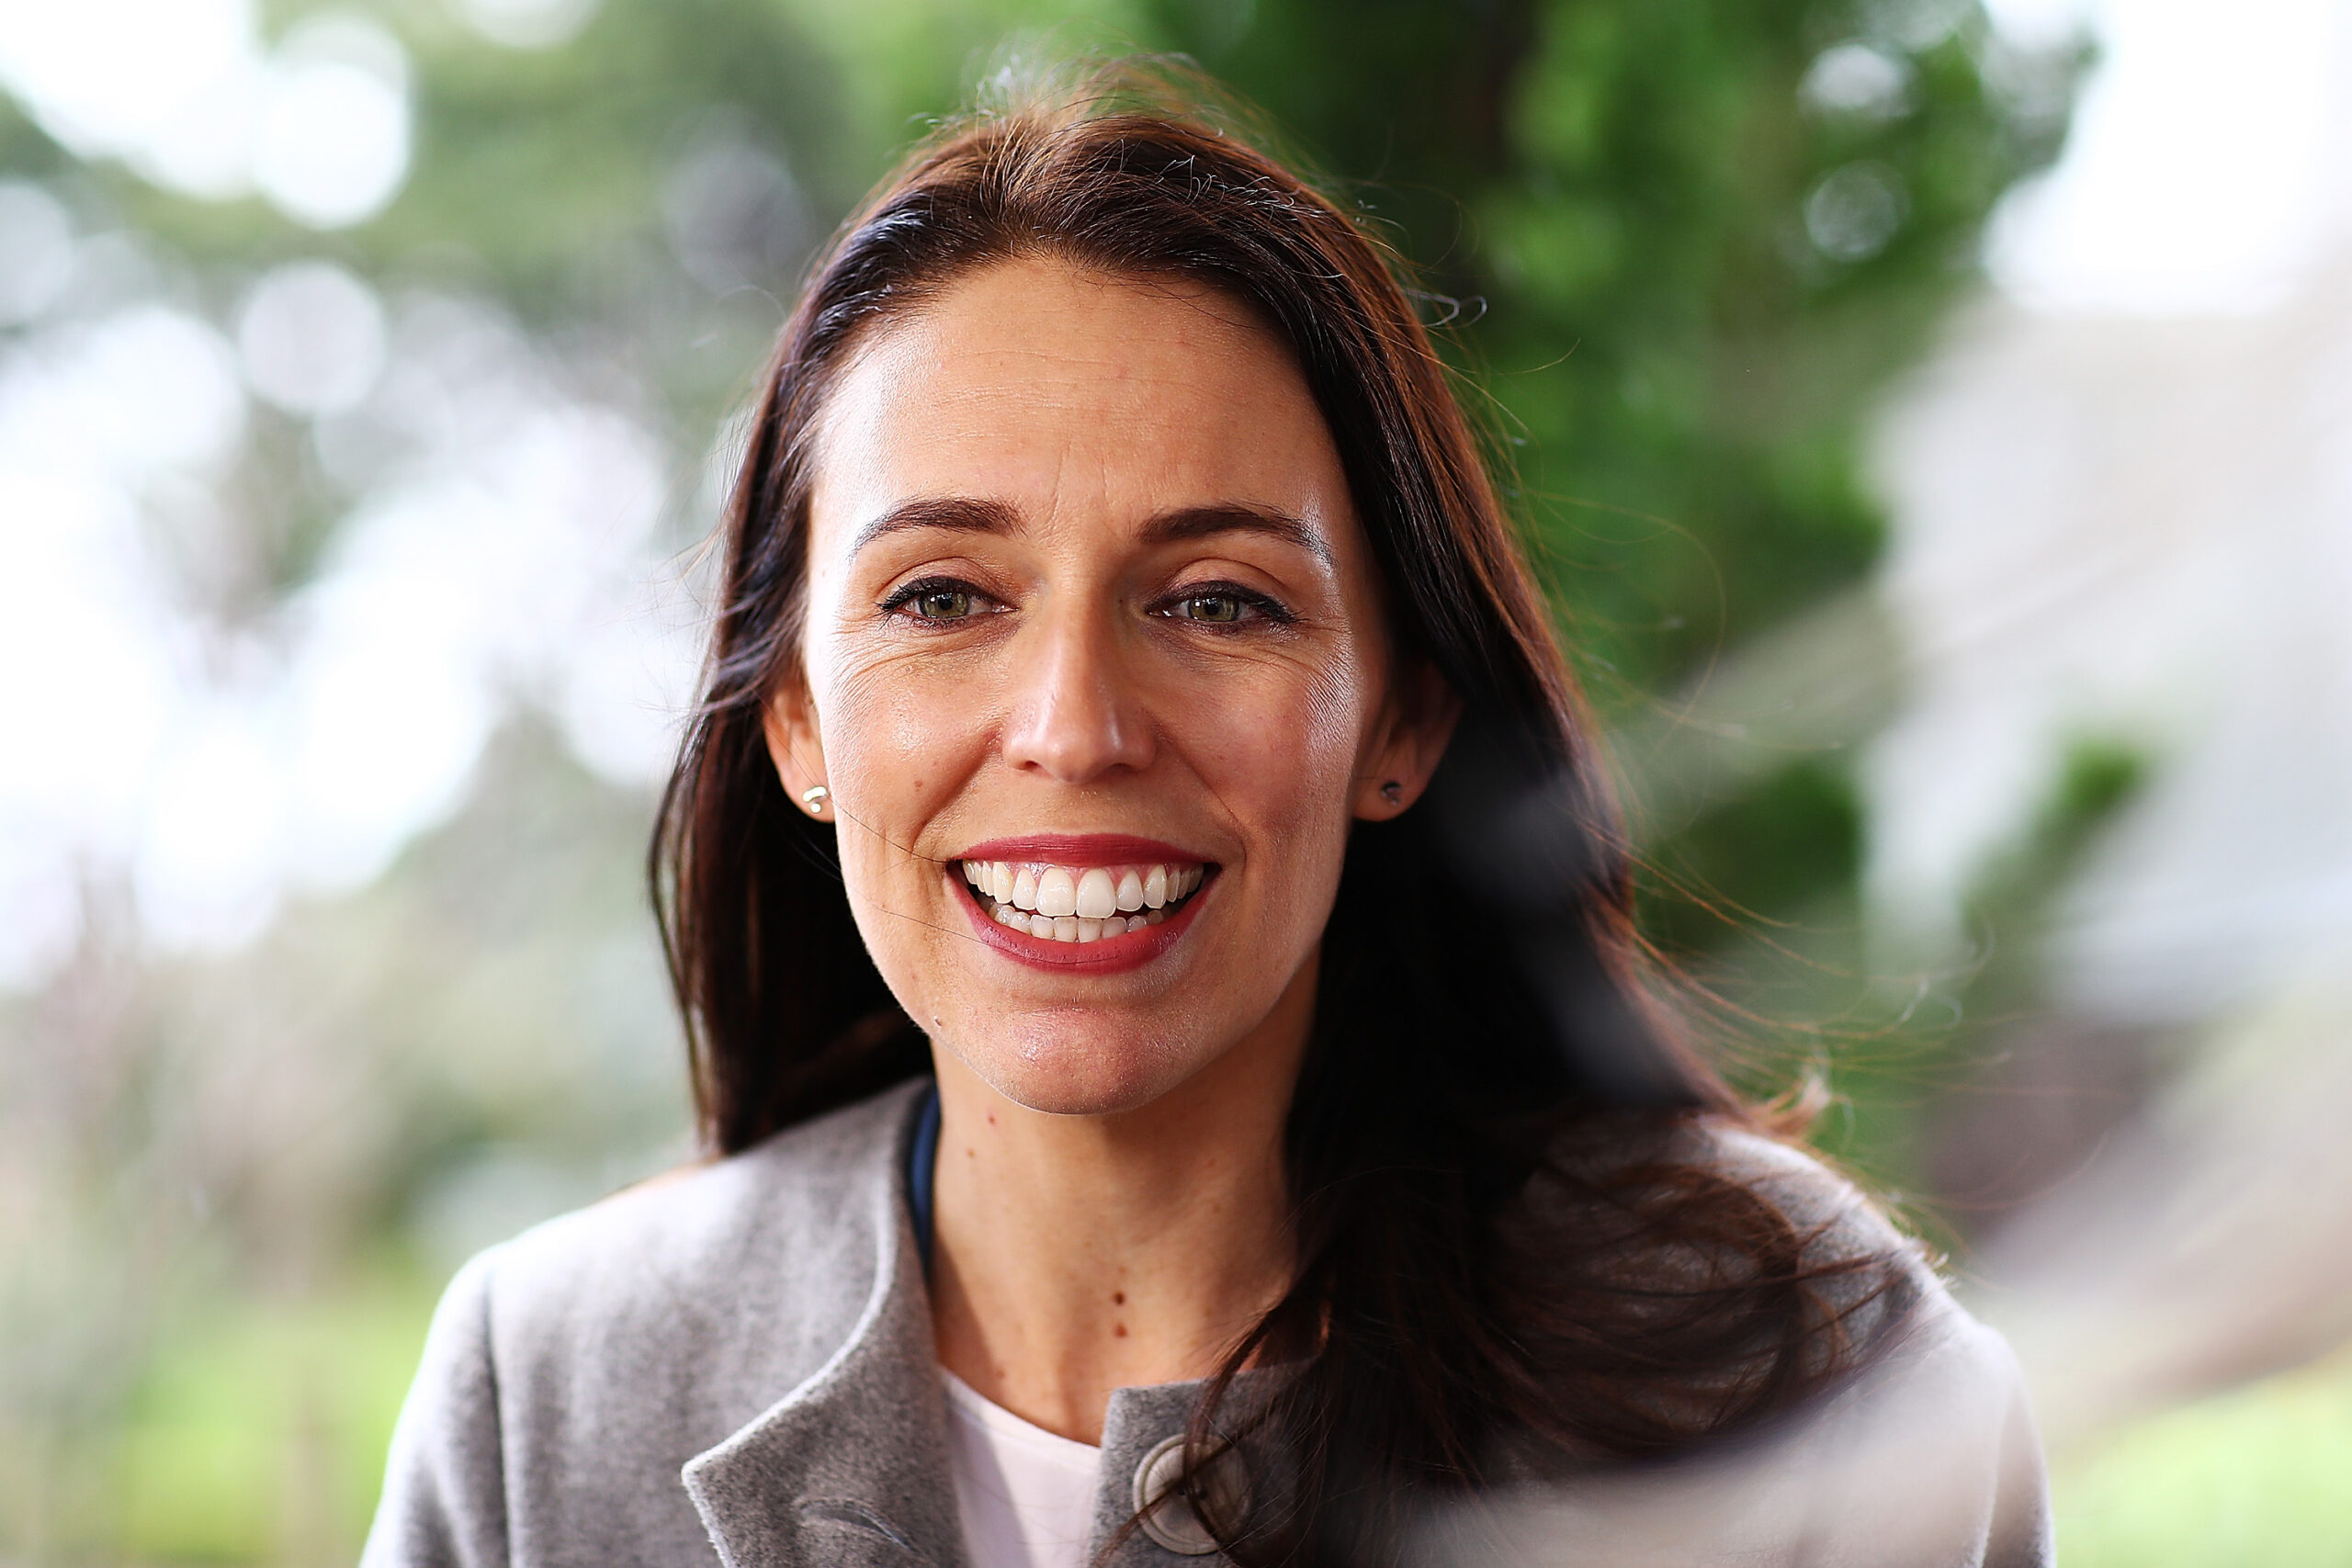 Jacinda Ardern appears in this month’s Vogue